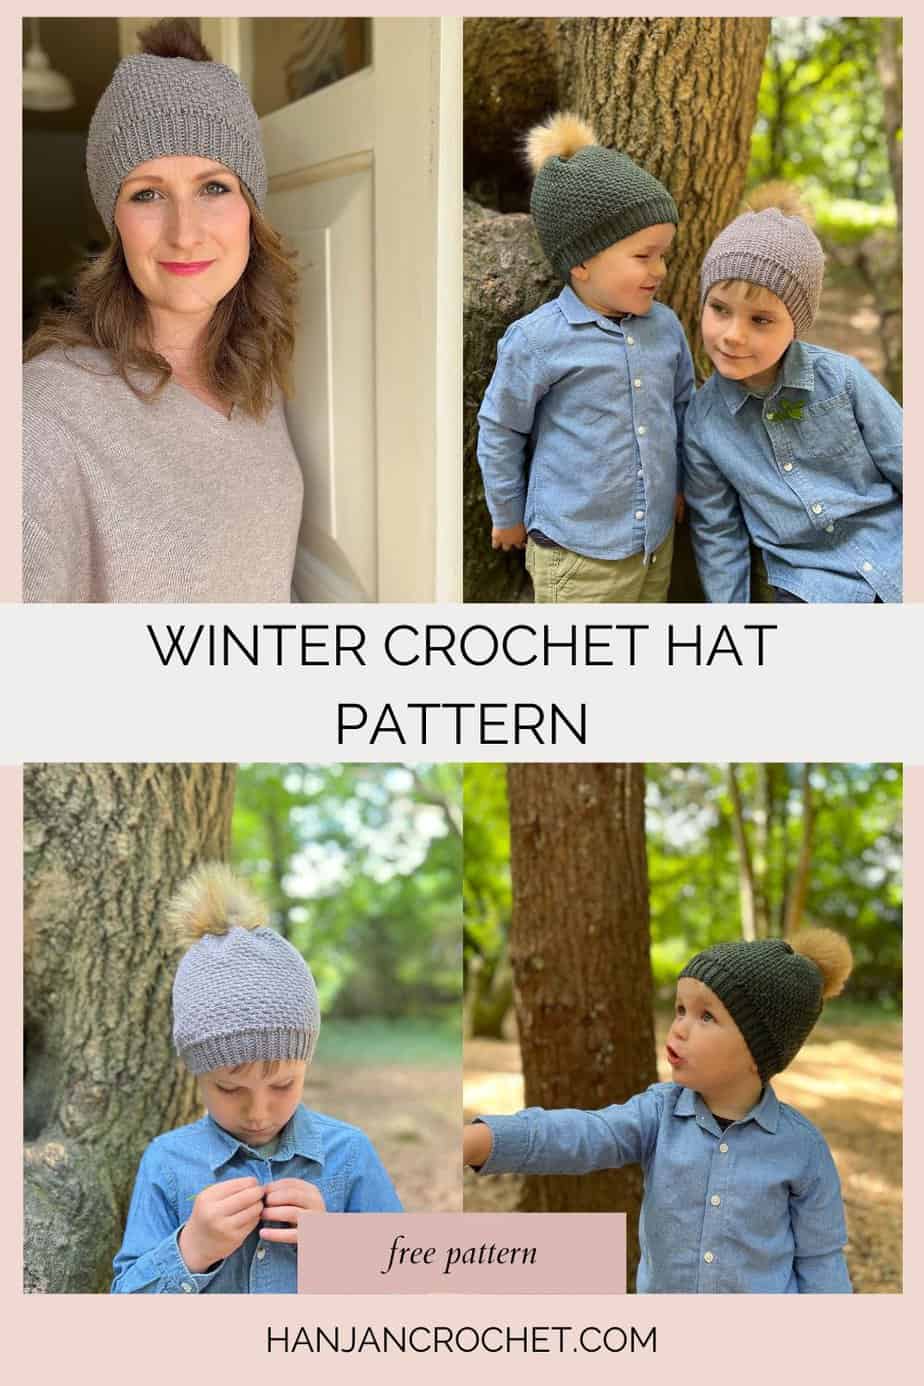 4 images of winter crochet hat pattern with texture and faux fur pom poms.